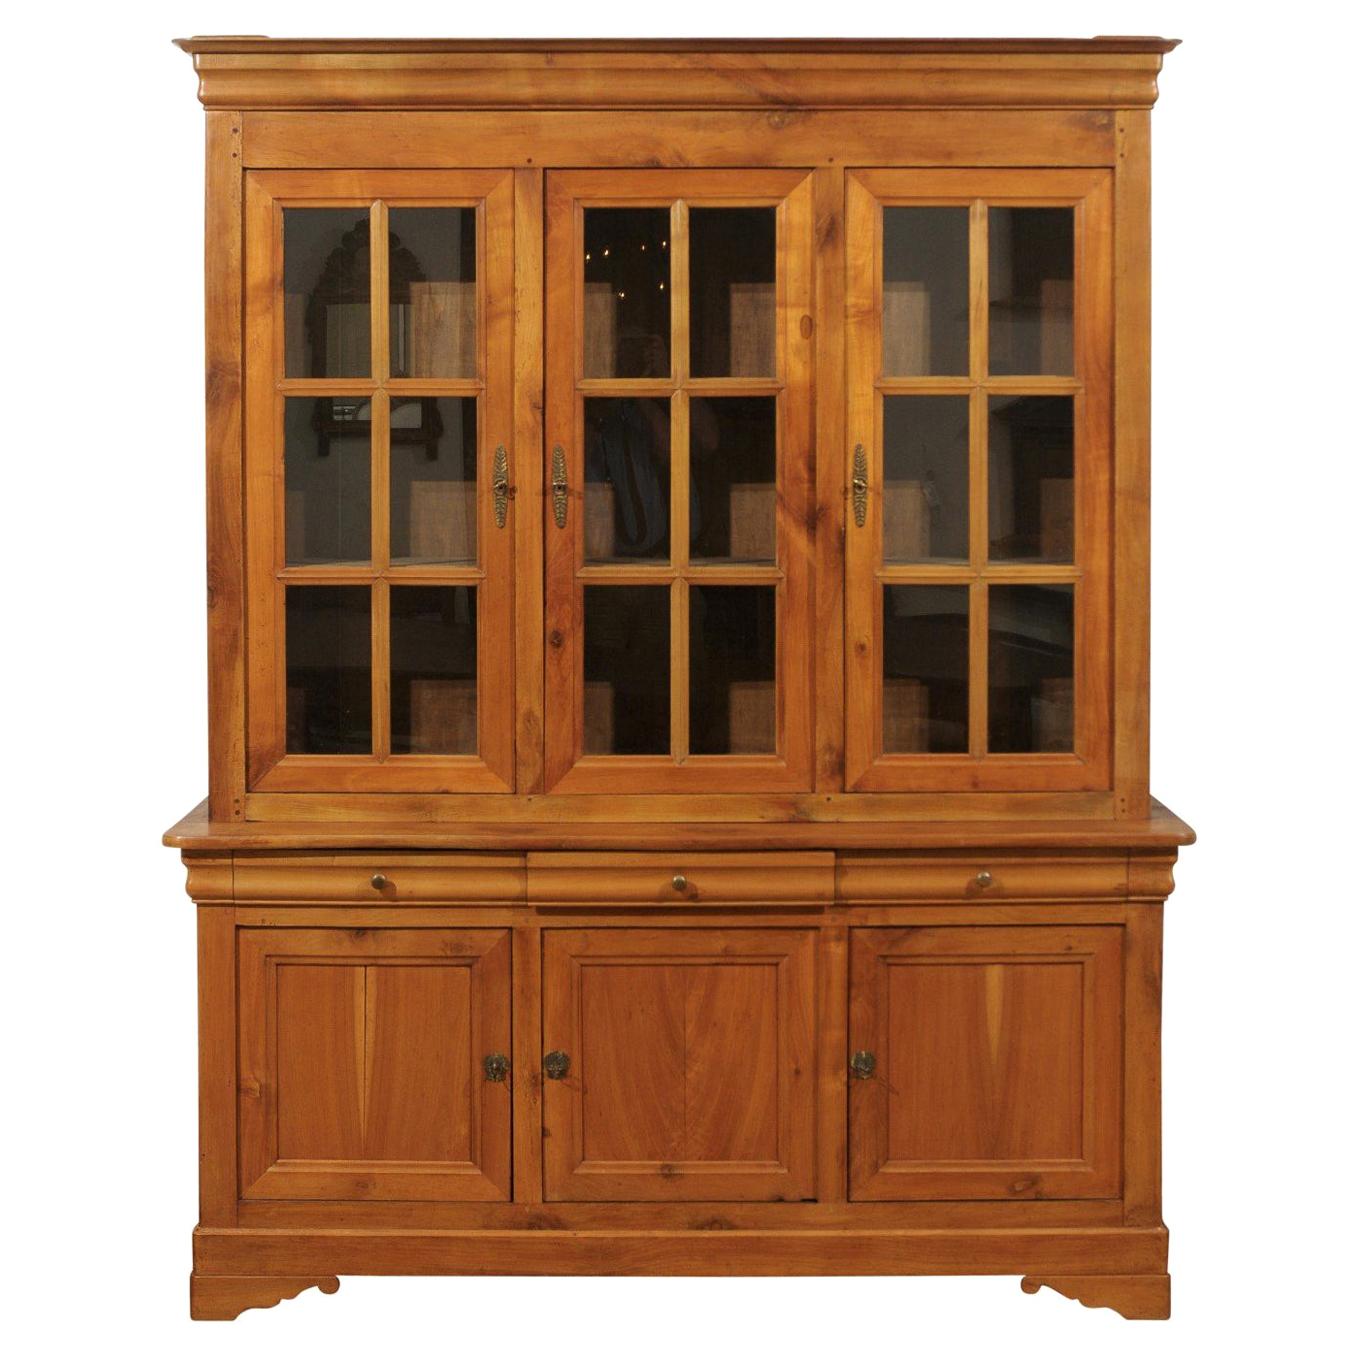 French 1900s Cherry Wood Two Part Cabinet with Inset Glass Doors and Drawers